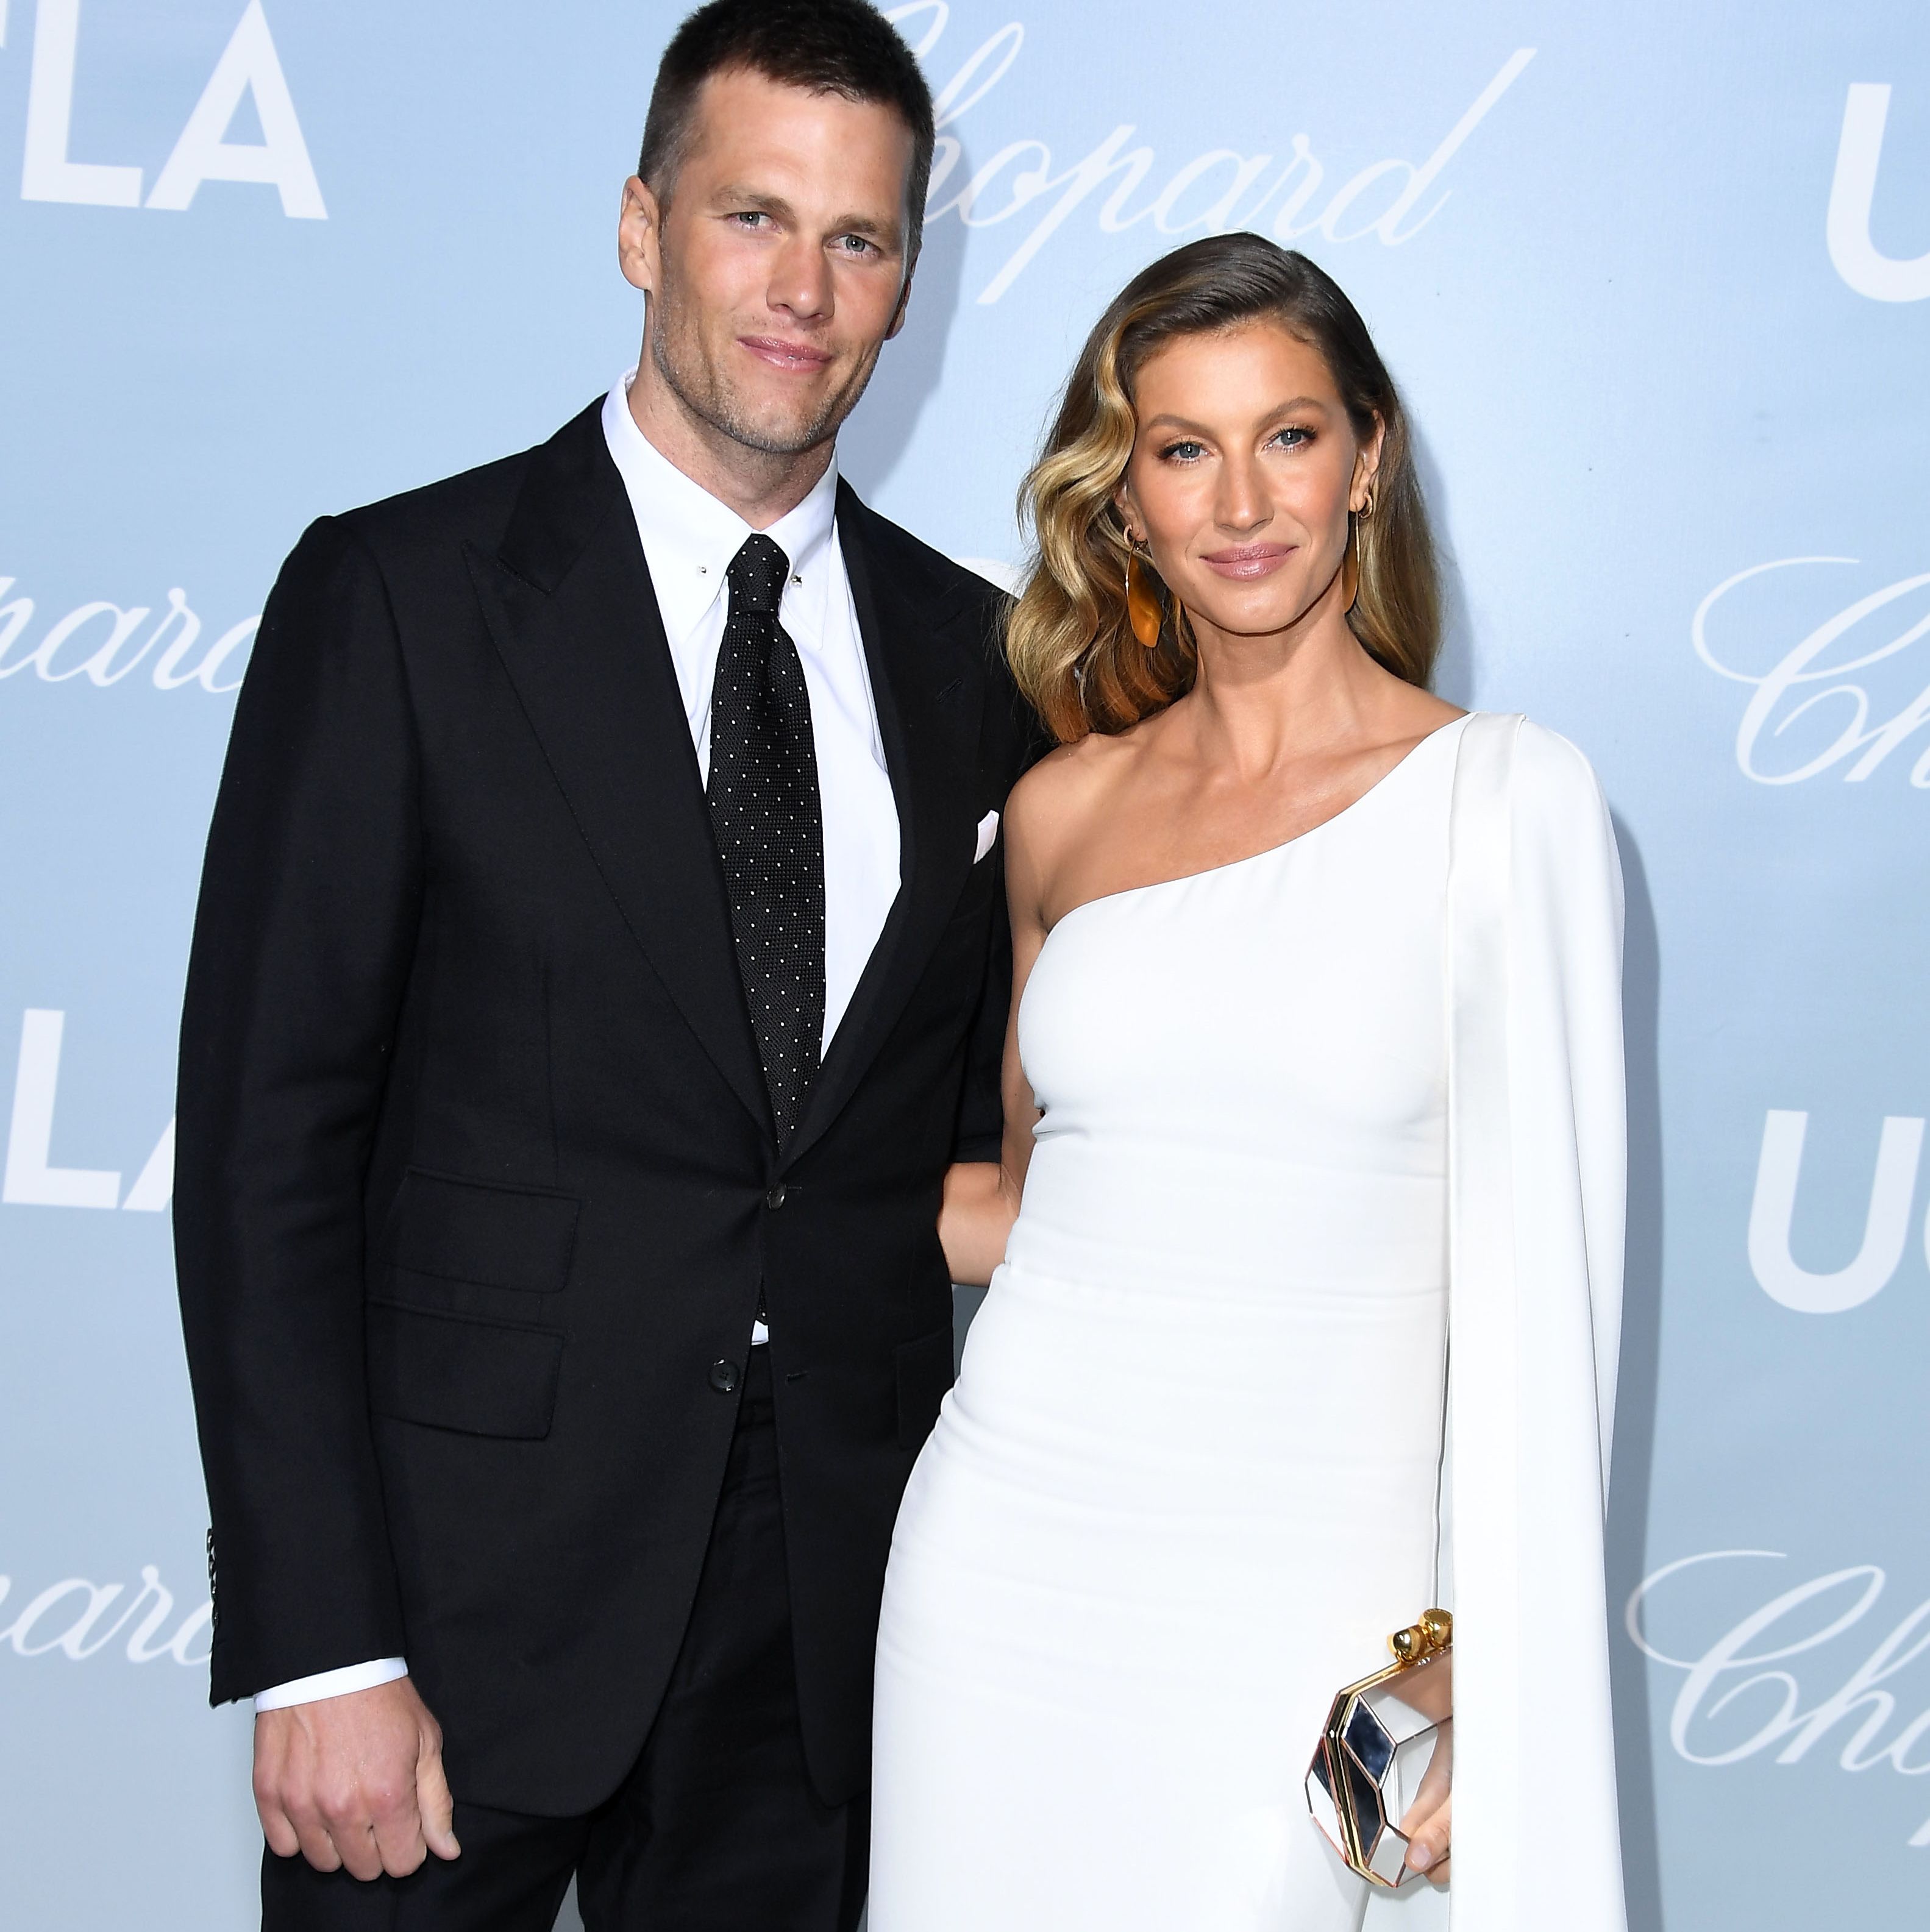 Tom Brady and Gisele Bündchen Are Reportedly in an 